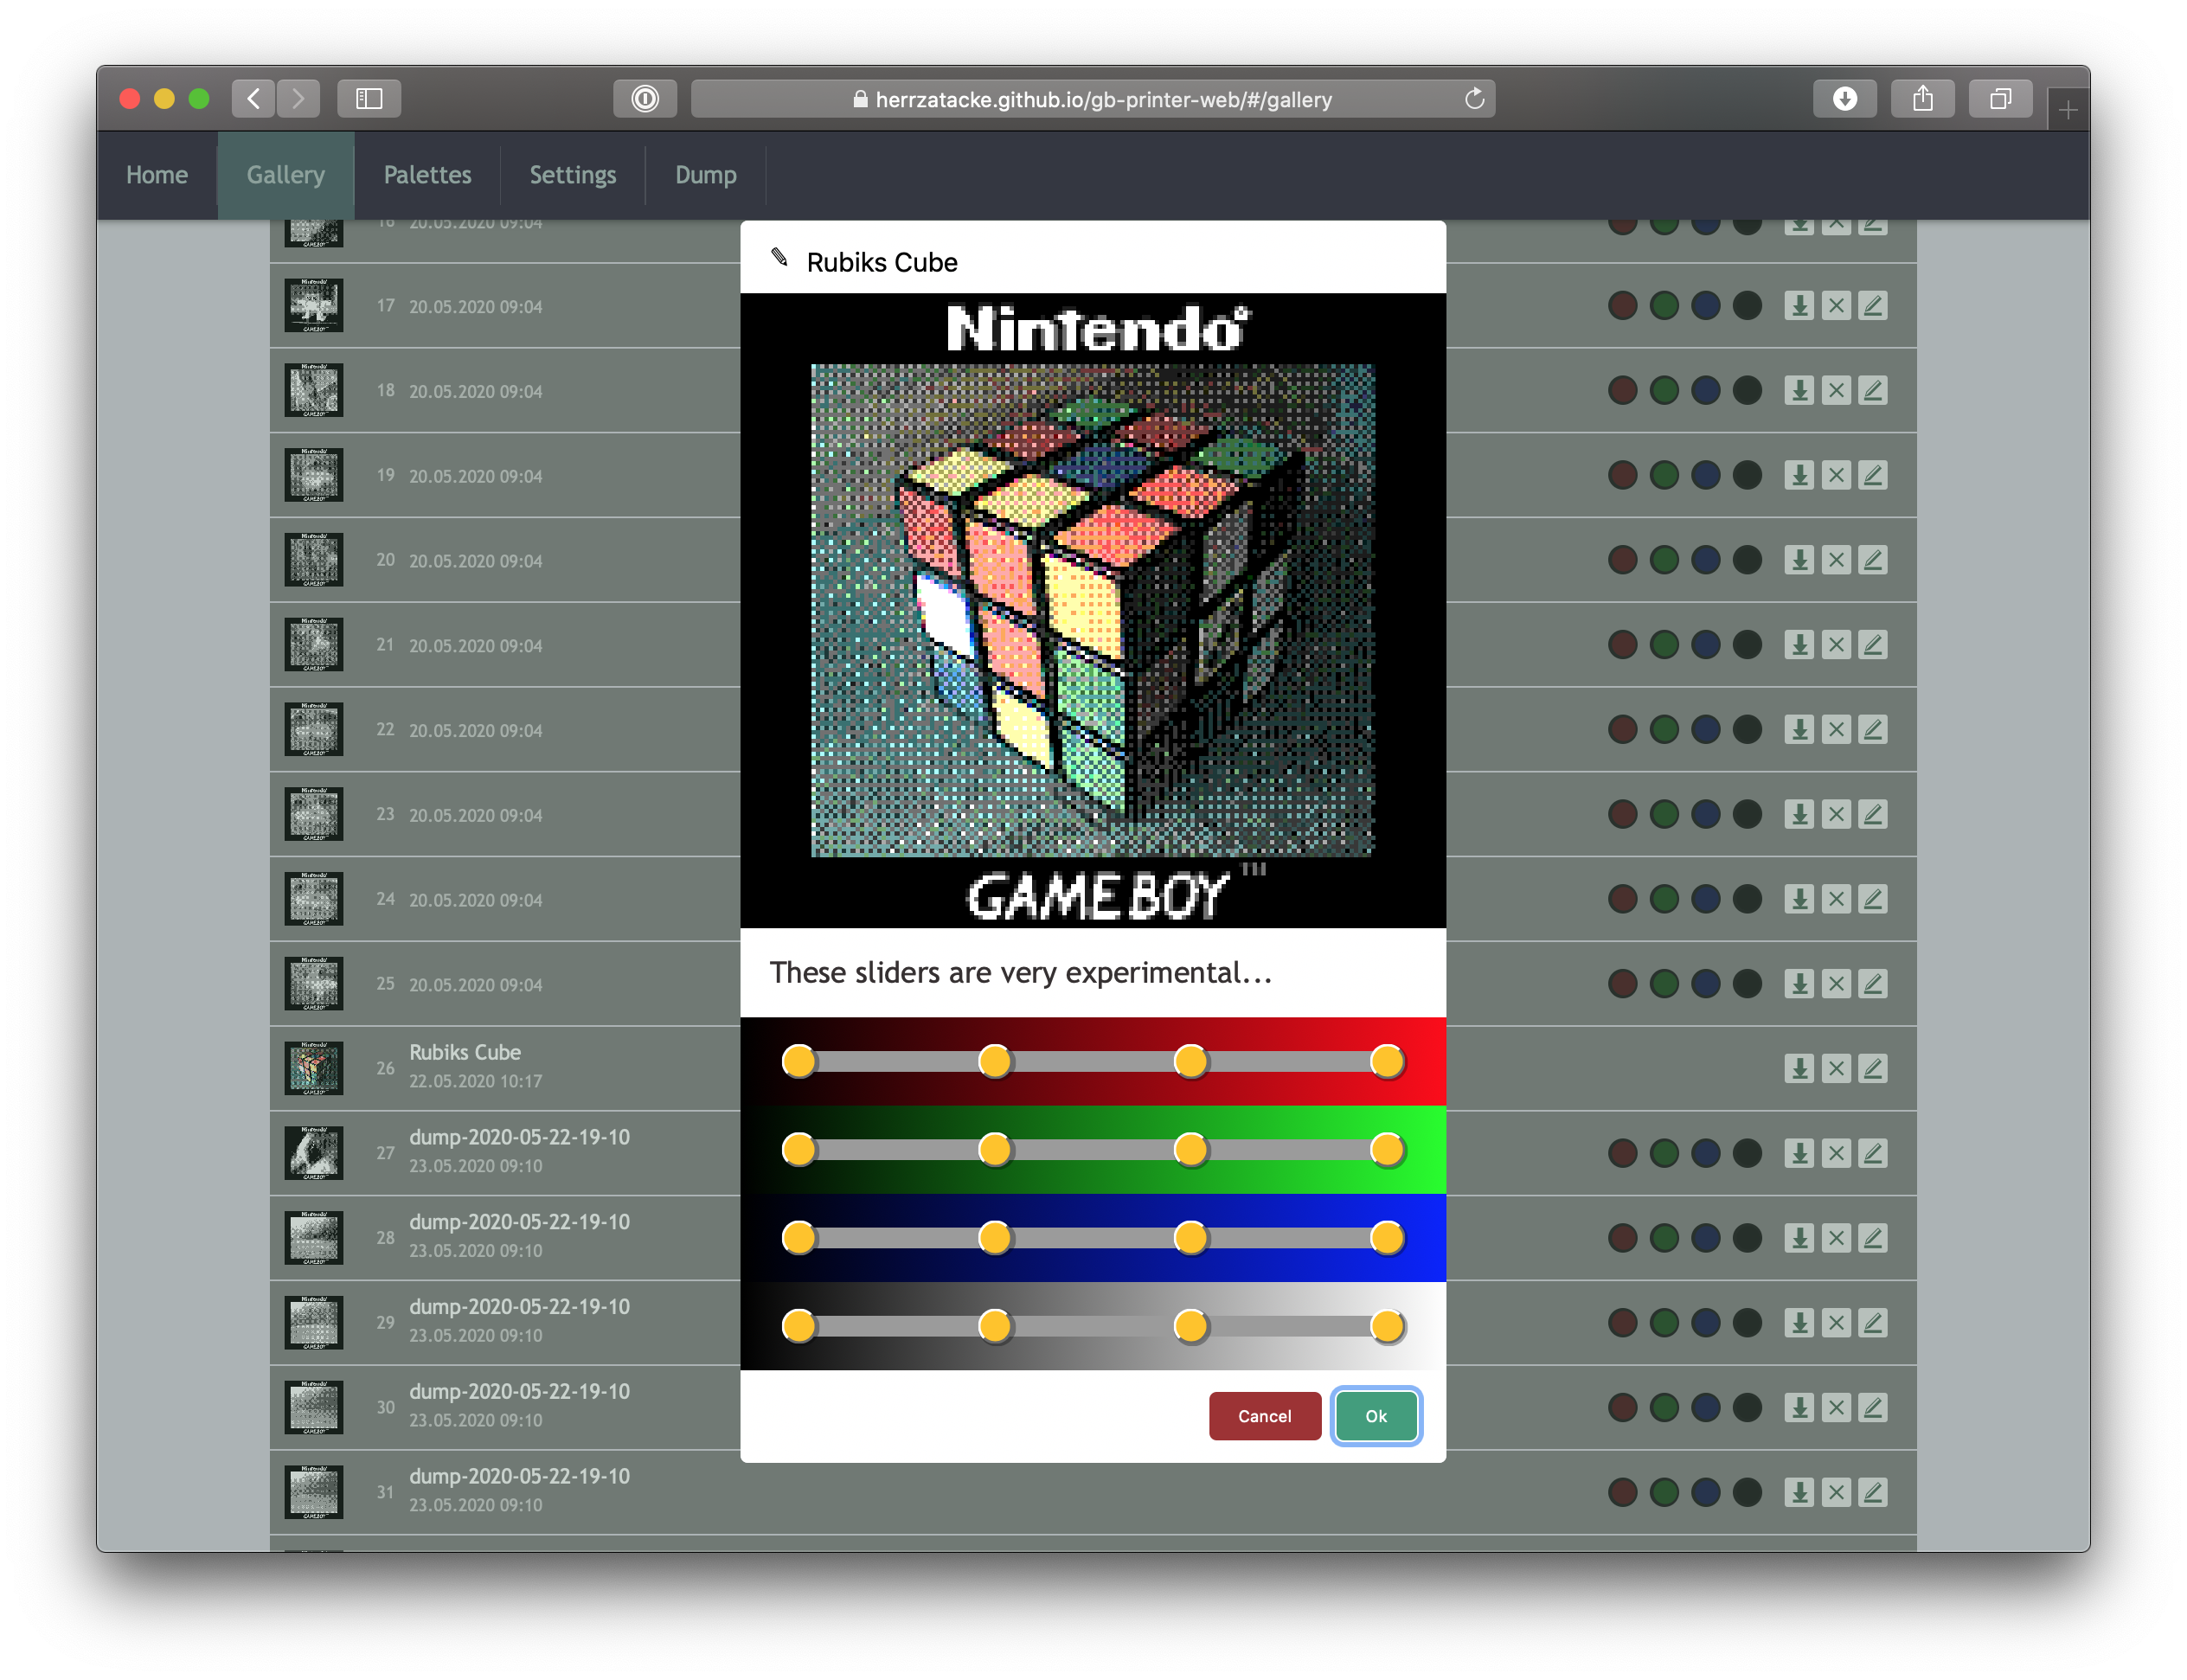 New website for decoding Game Boy Photos